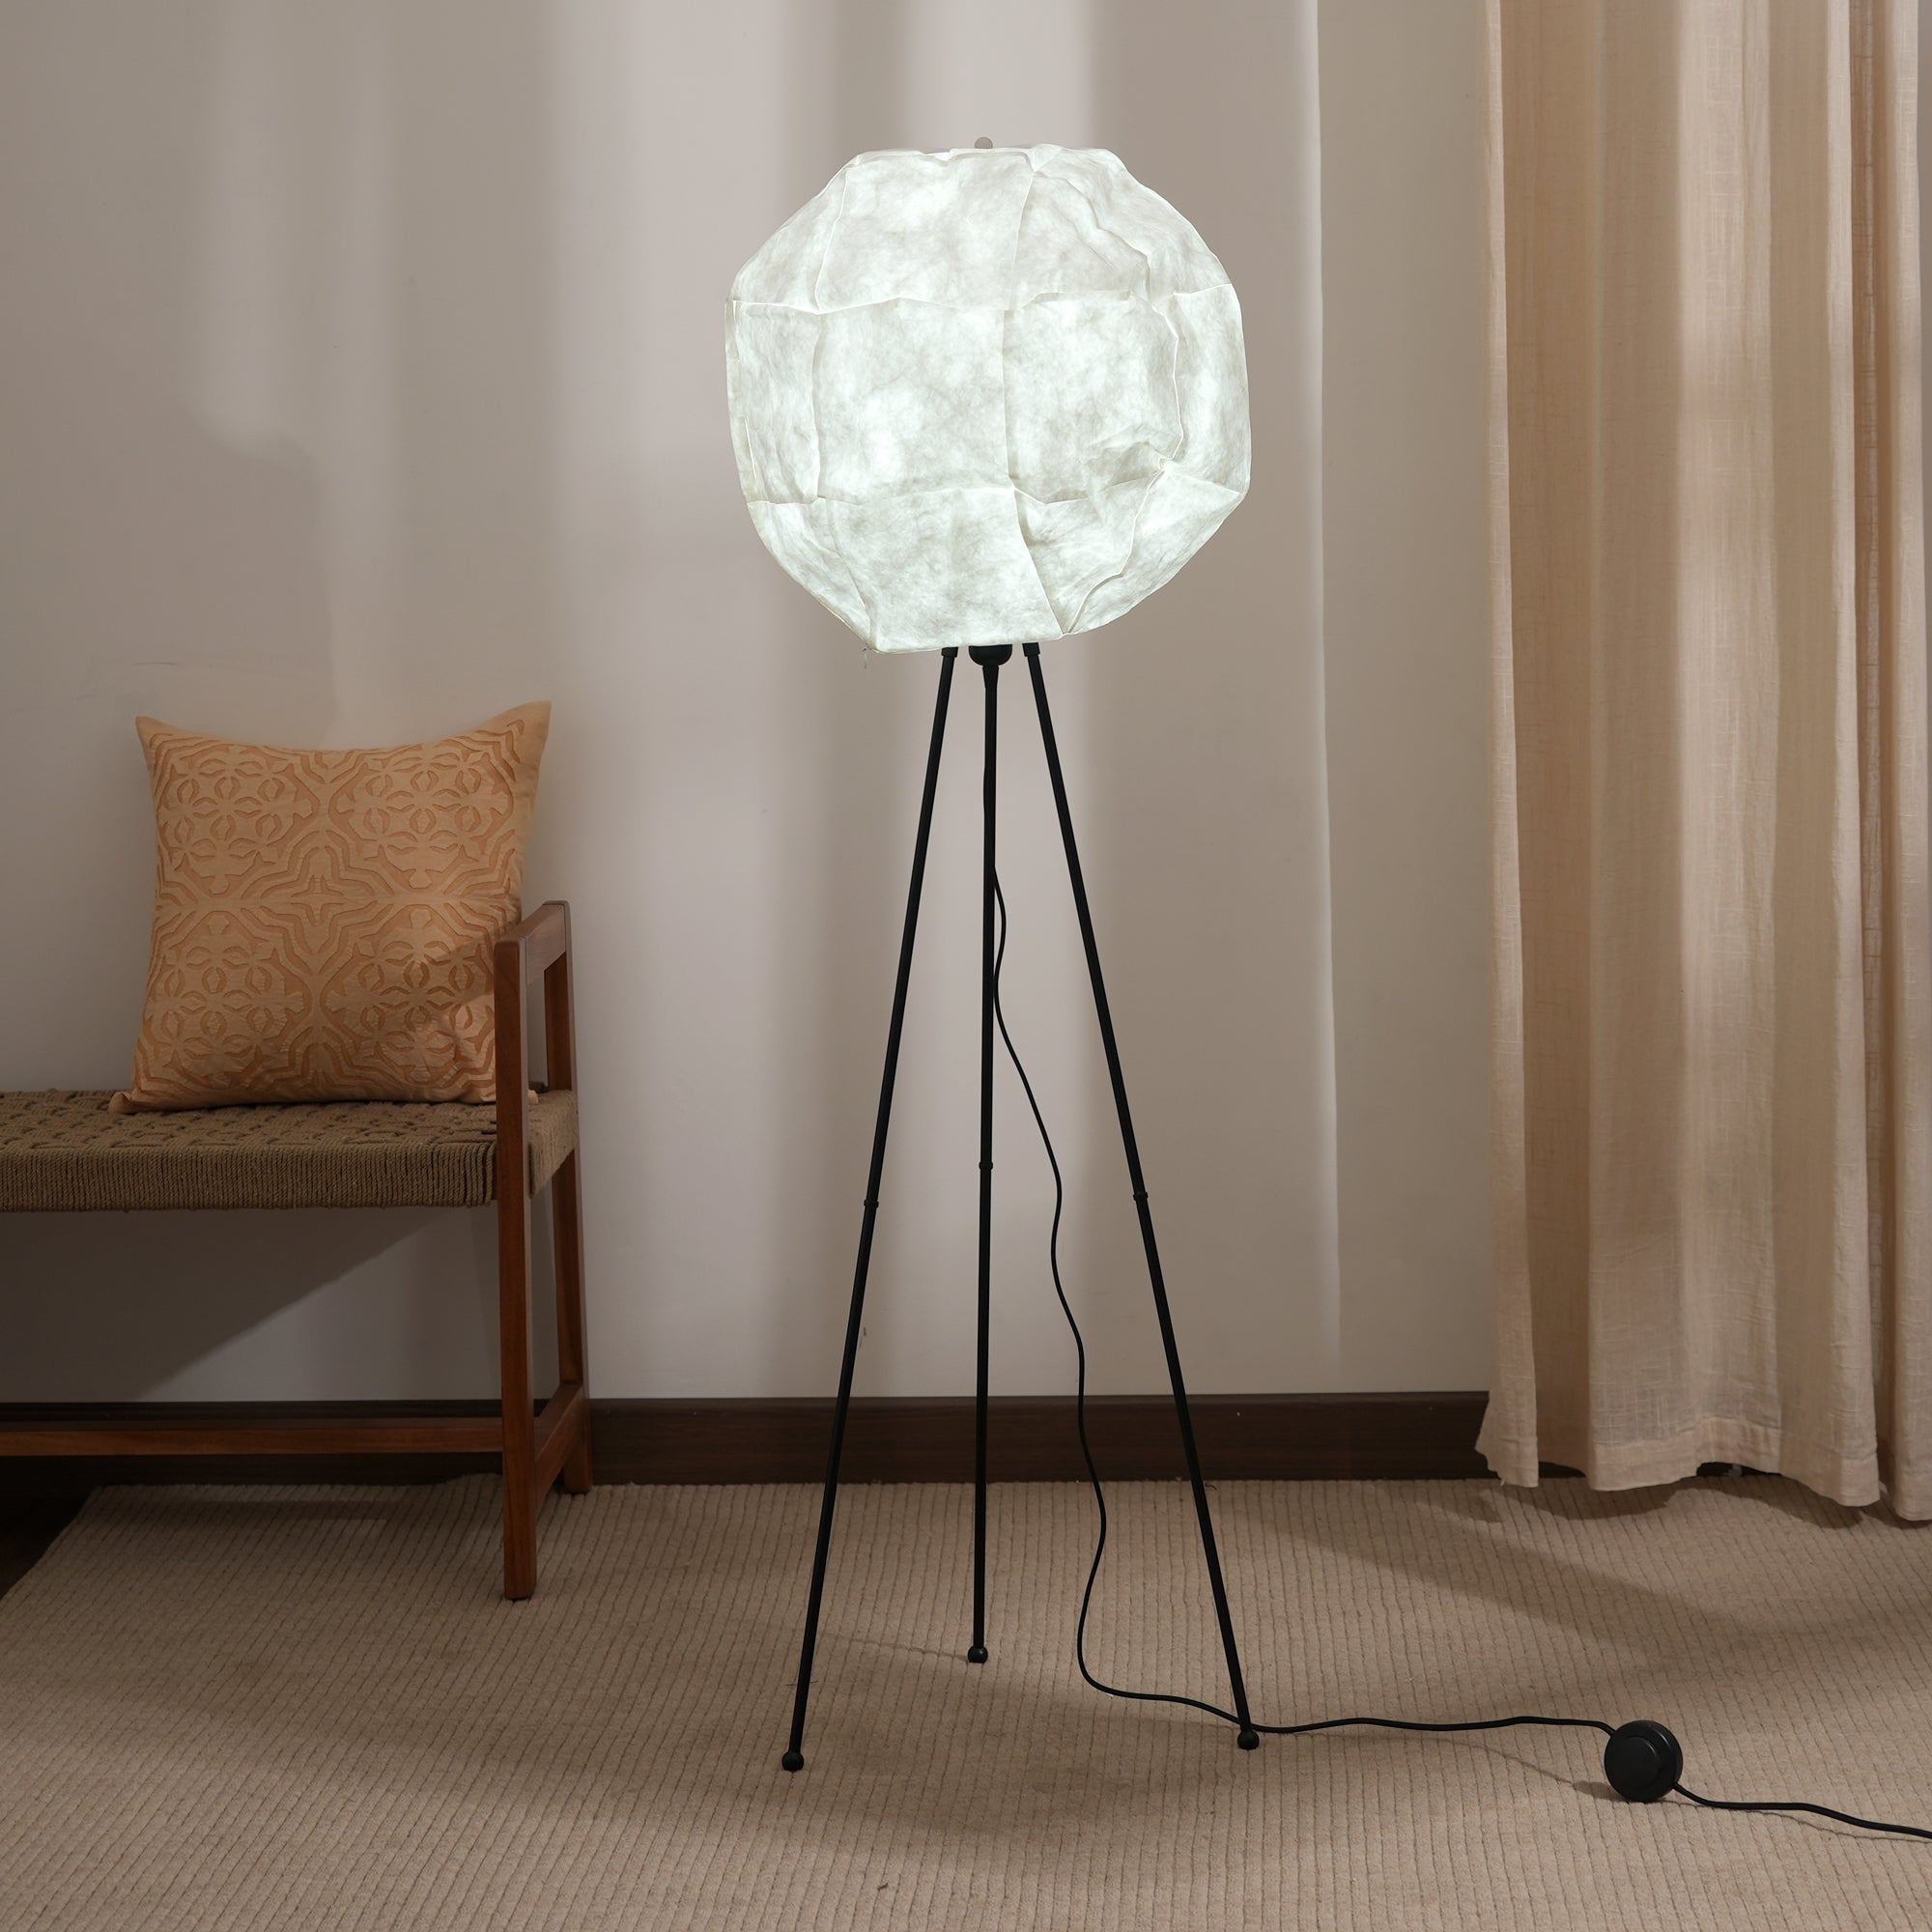 Luna Floor Lamp - Tripod Floor Lamp, Innovative Handcrafted Design, Recycled Polyethylene and Metal made standing light